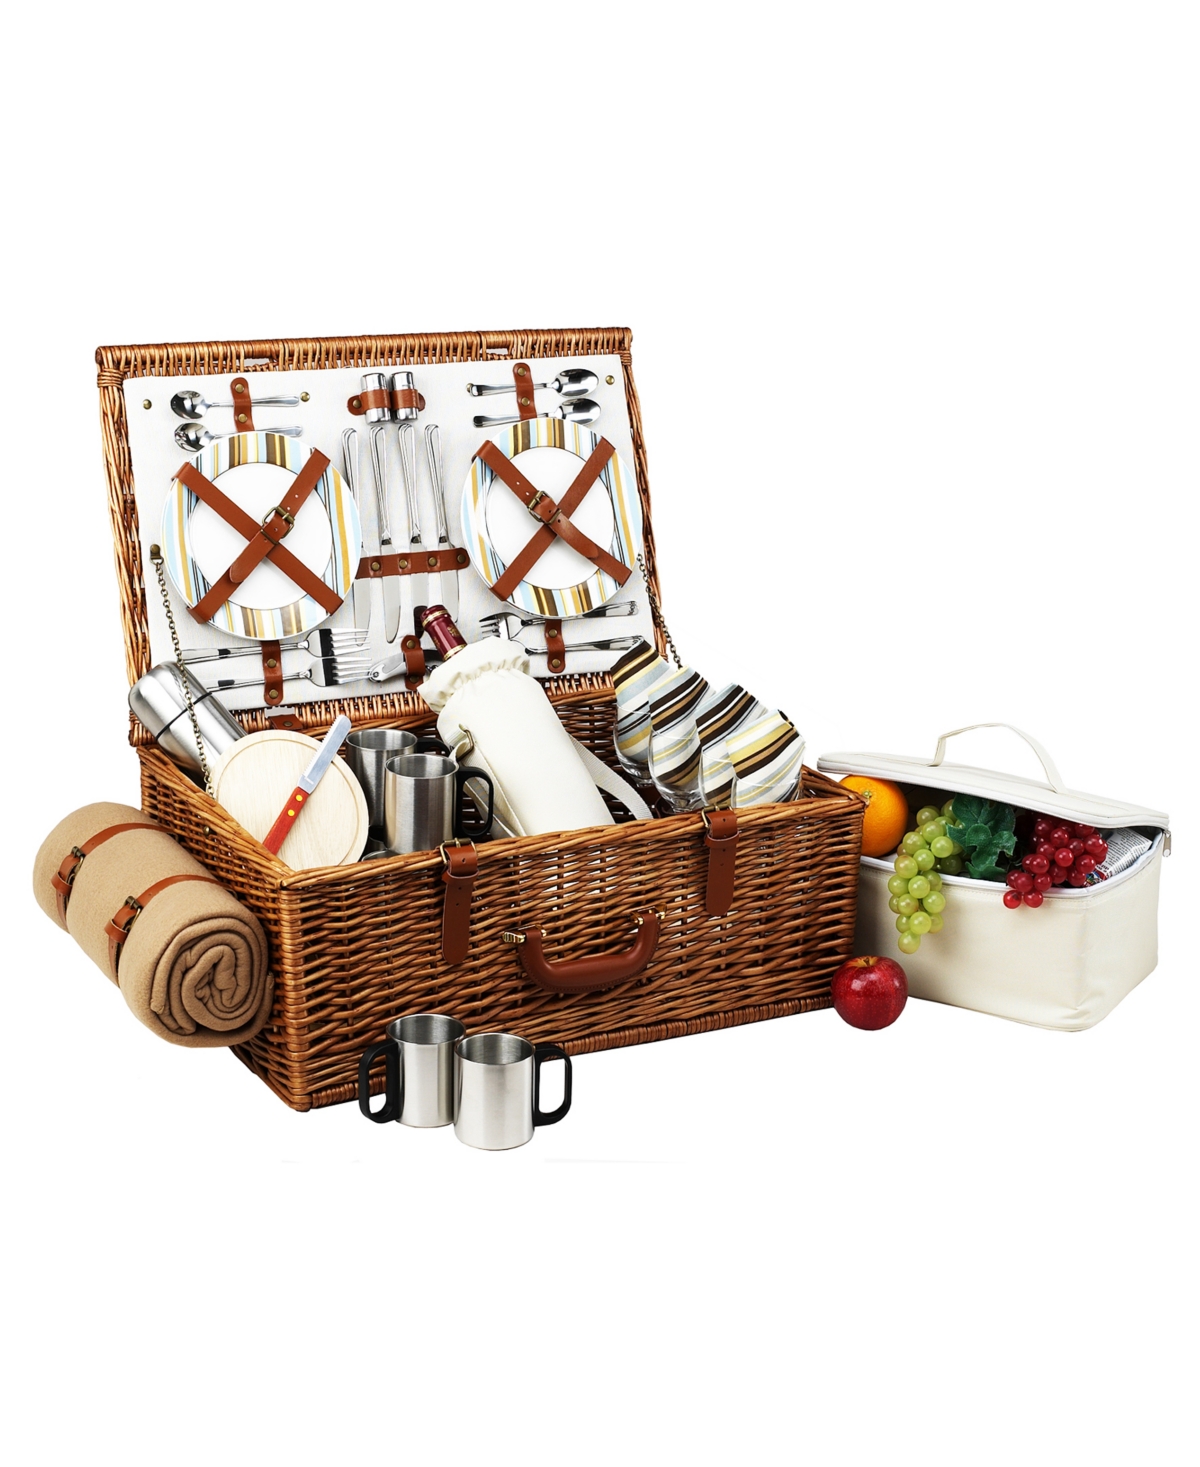 Dorset English-Style Picnic, Coffee Basket for 4 with Blanket - Turquoise